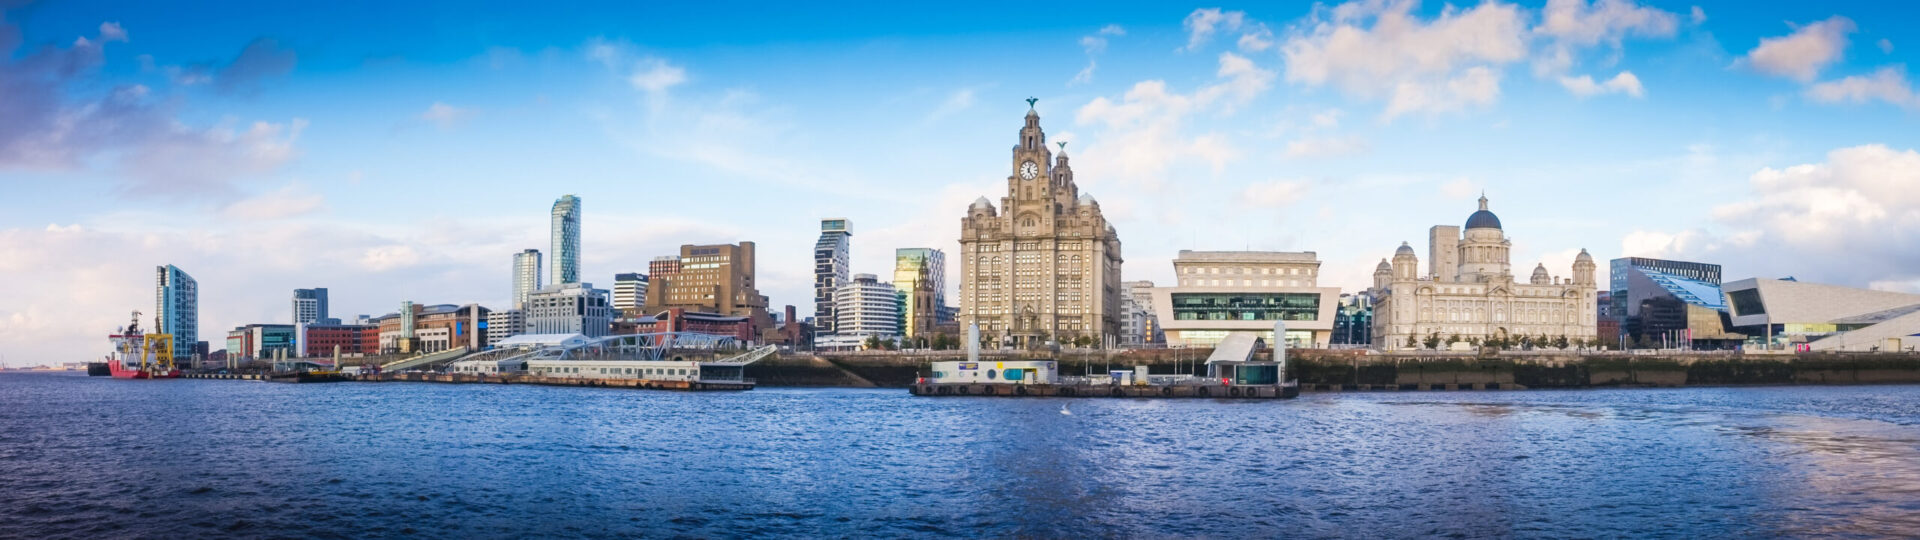 Panoramic,View,Of,Liverpool,Waterfront,,Including,Modern,Office,Buildings,And